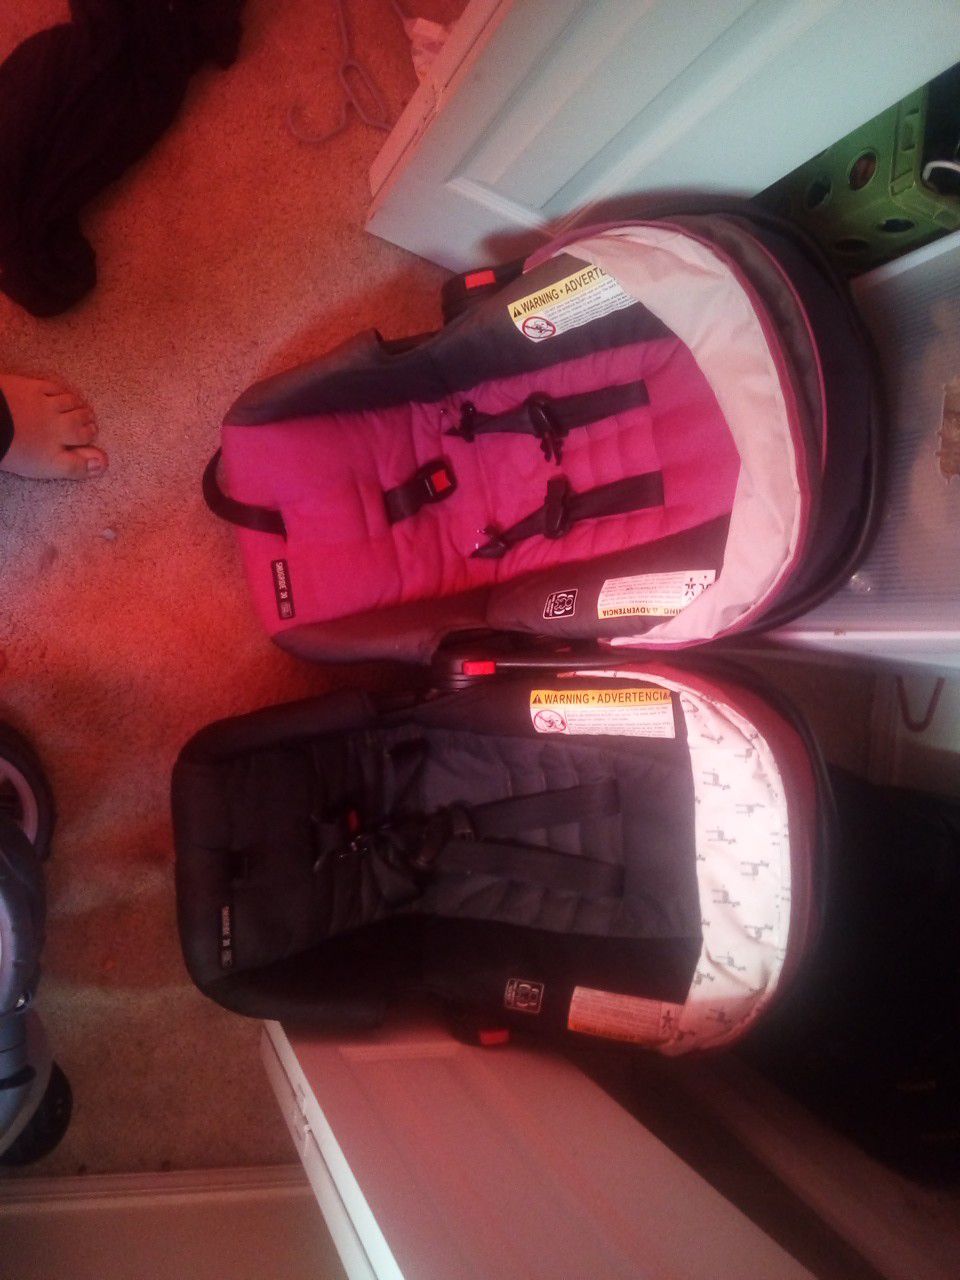 Anyone in need of 2 infant car seats for a boy or girl need to trade for a changing table or pack and play